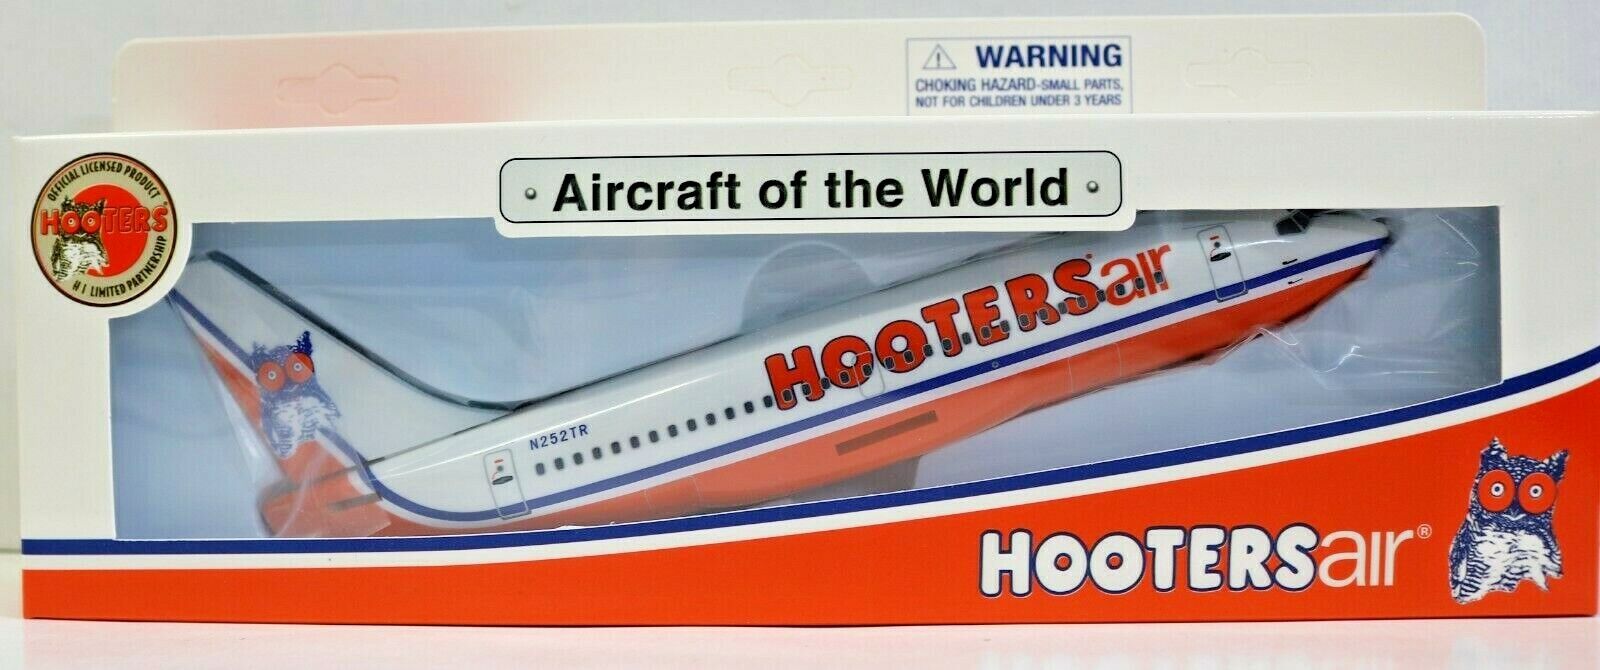 Hooters Air Boeing 737-200 Scale 1:130 Airplane Model Defunct Airlines - New 